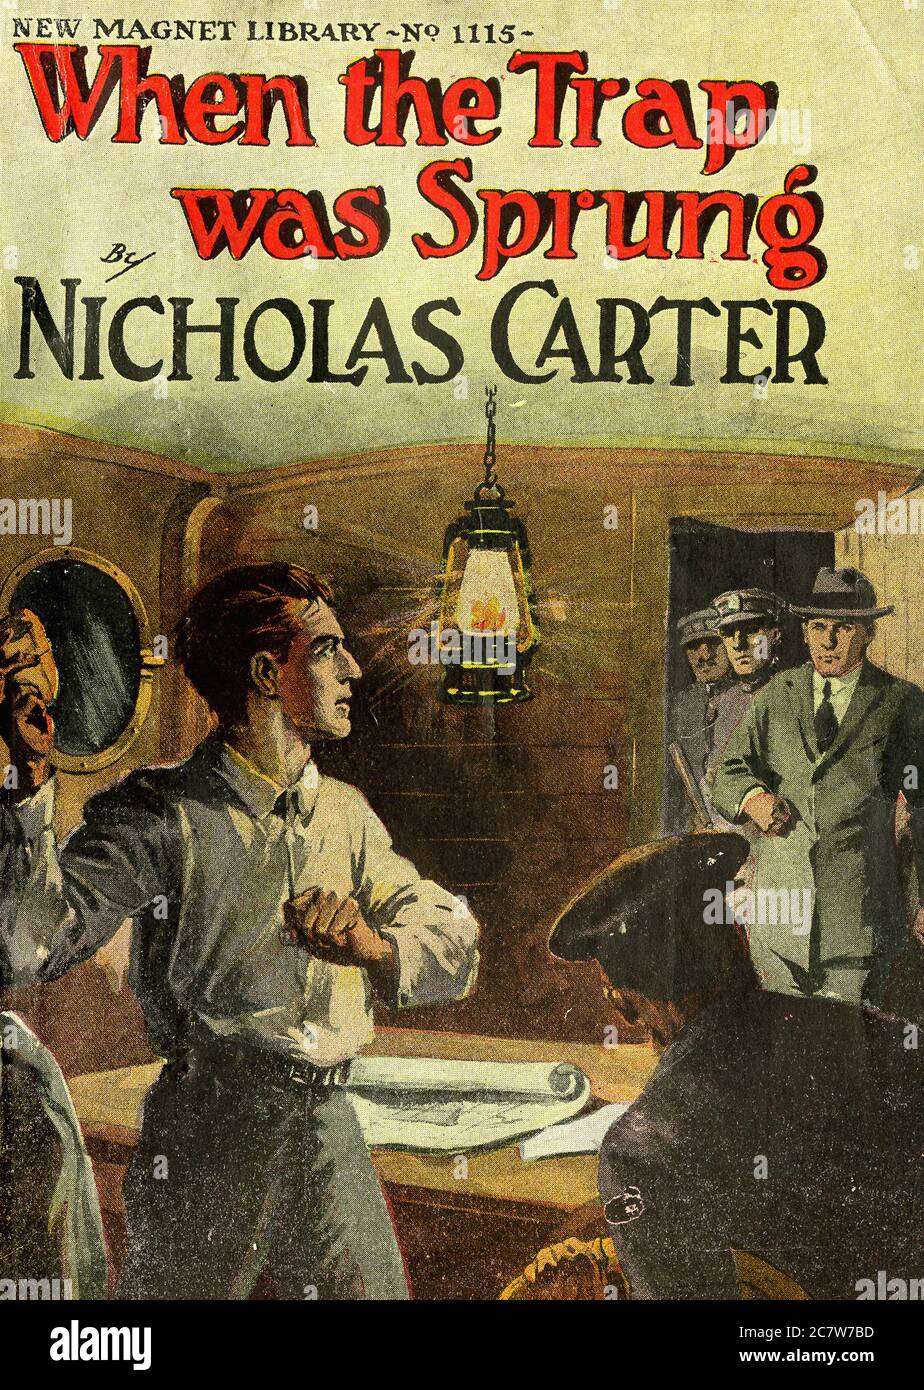 Nicholas Carter - When the Trap was Sprung - New Magnet Library - Vintage Pulp Literary Stock Photo